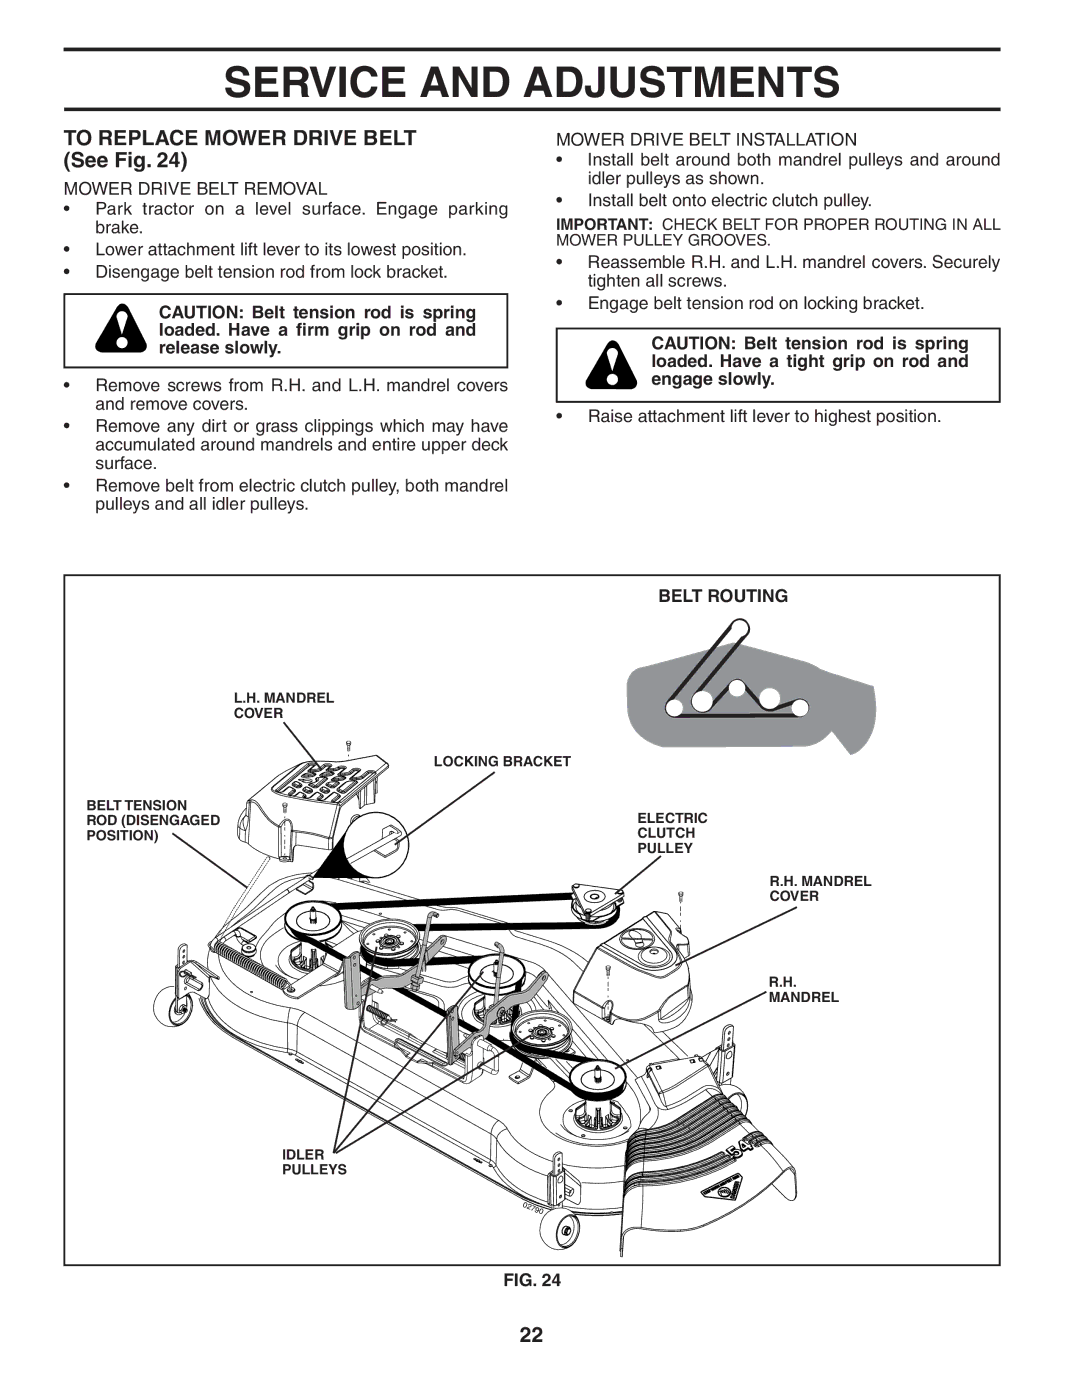 Poulan 195806 To Replace Mower Drive Belt See Fig, Mower Drive Belt Removal, Mower Drive Belt Installation, Belt Routing 